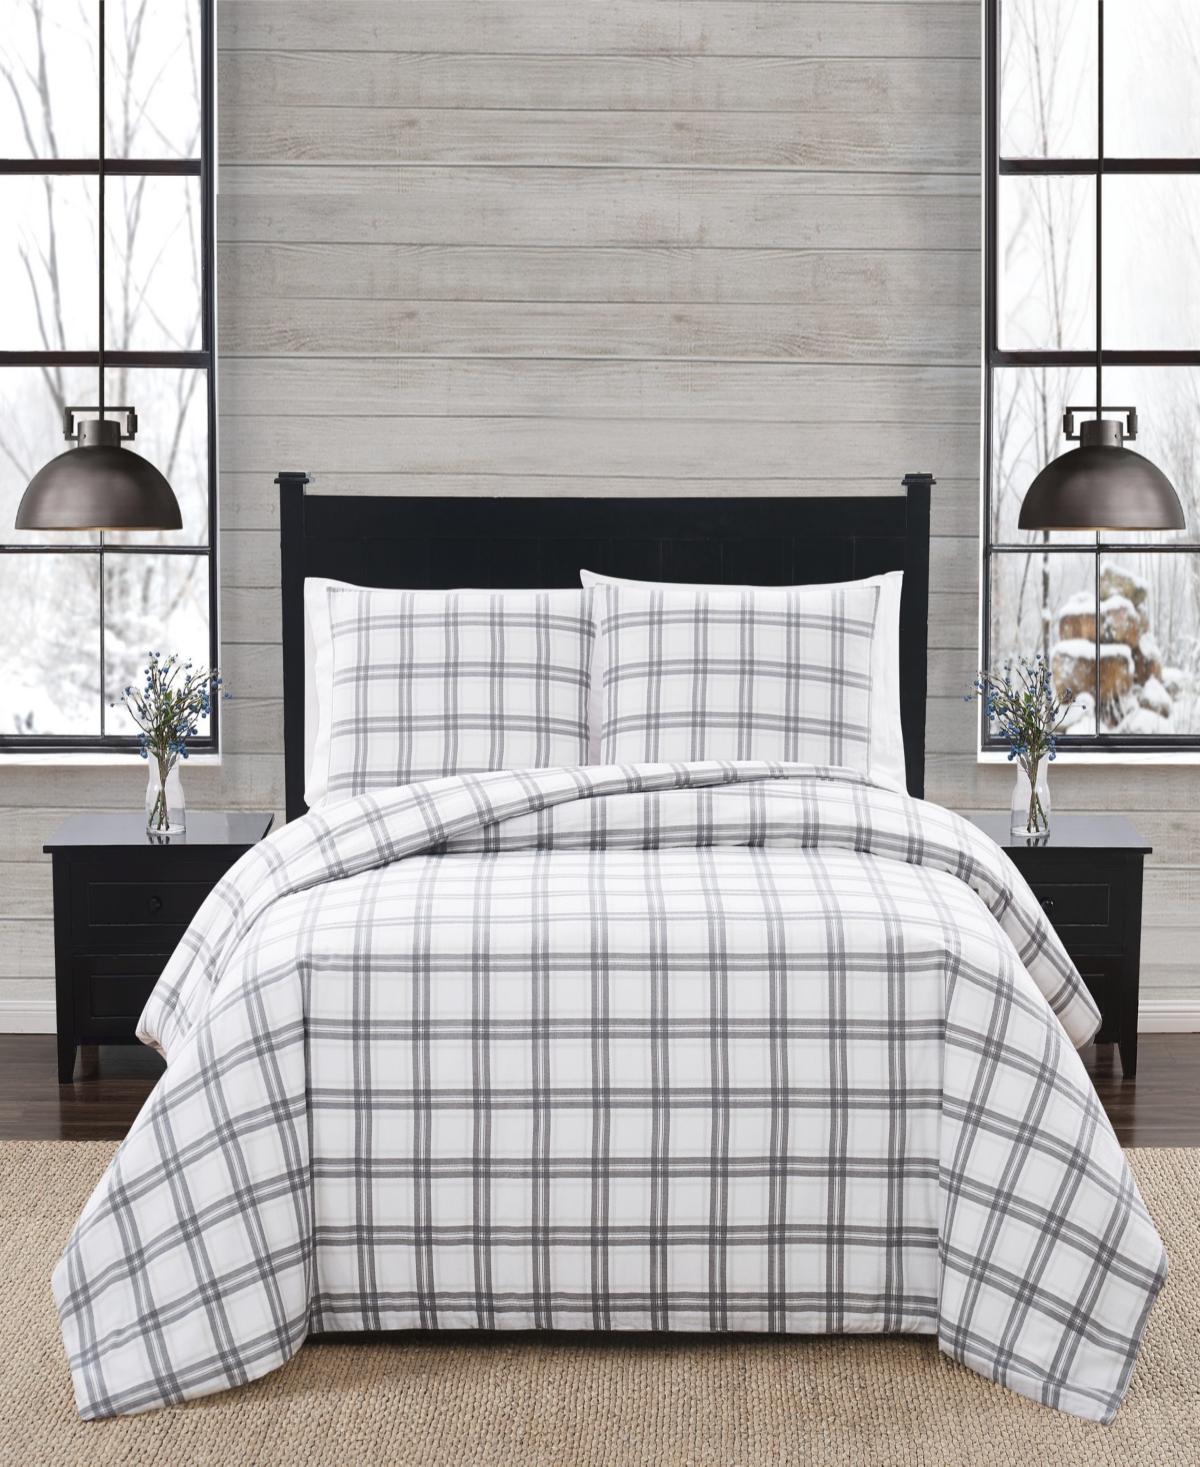 London Fog Plaid 3 Piece Flannel Comforter Set, Full/queen In White,gray